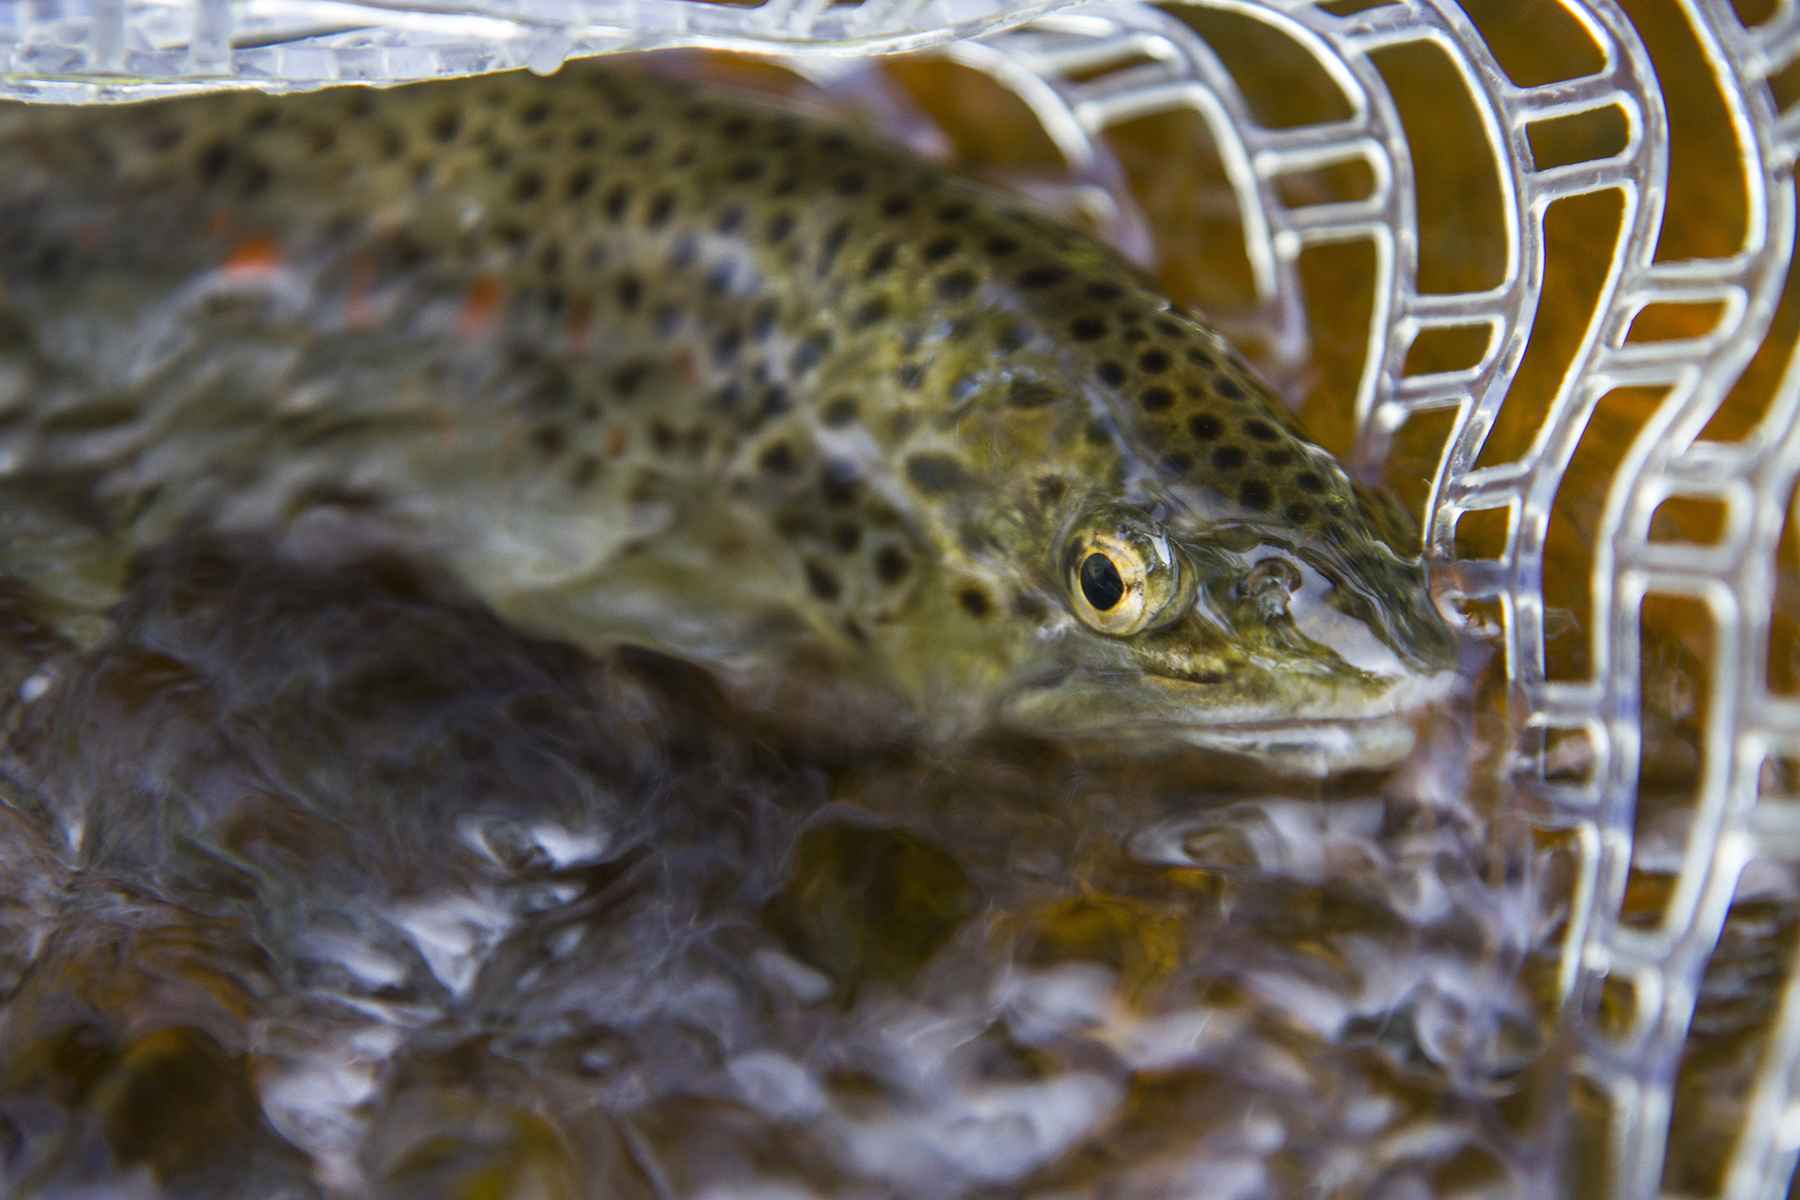 Winter trout fishing  techniques and apparel strategy - Telluride Angler